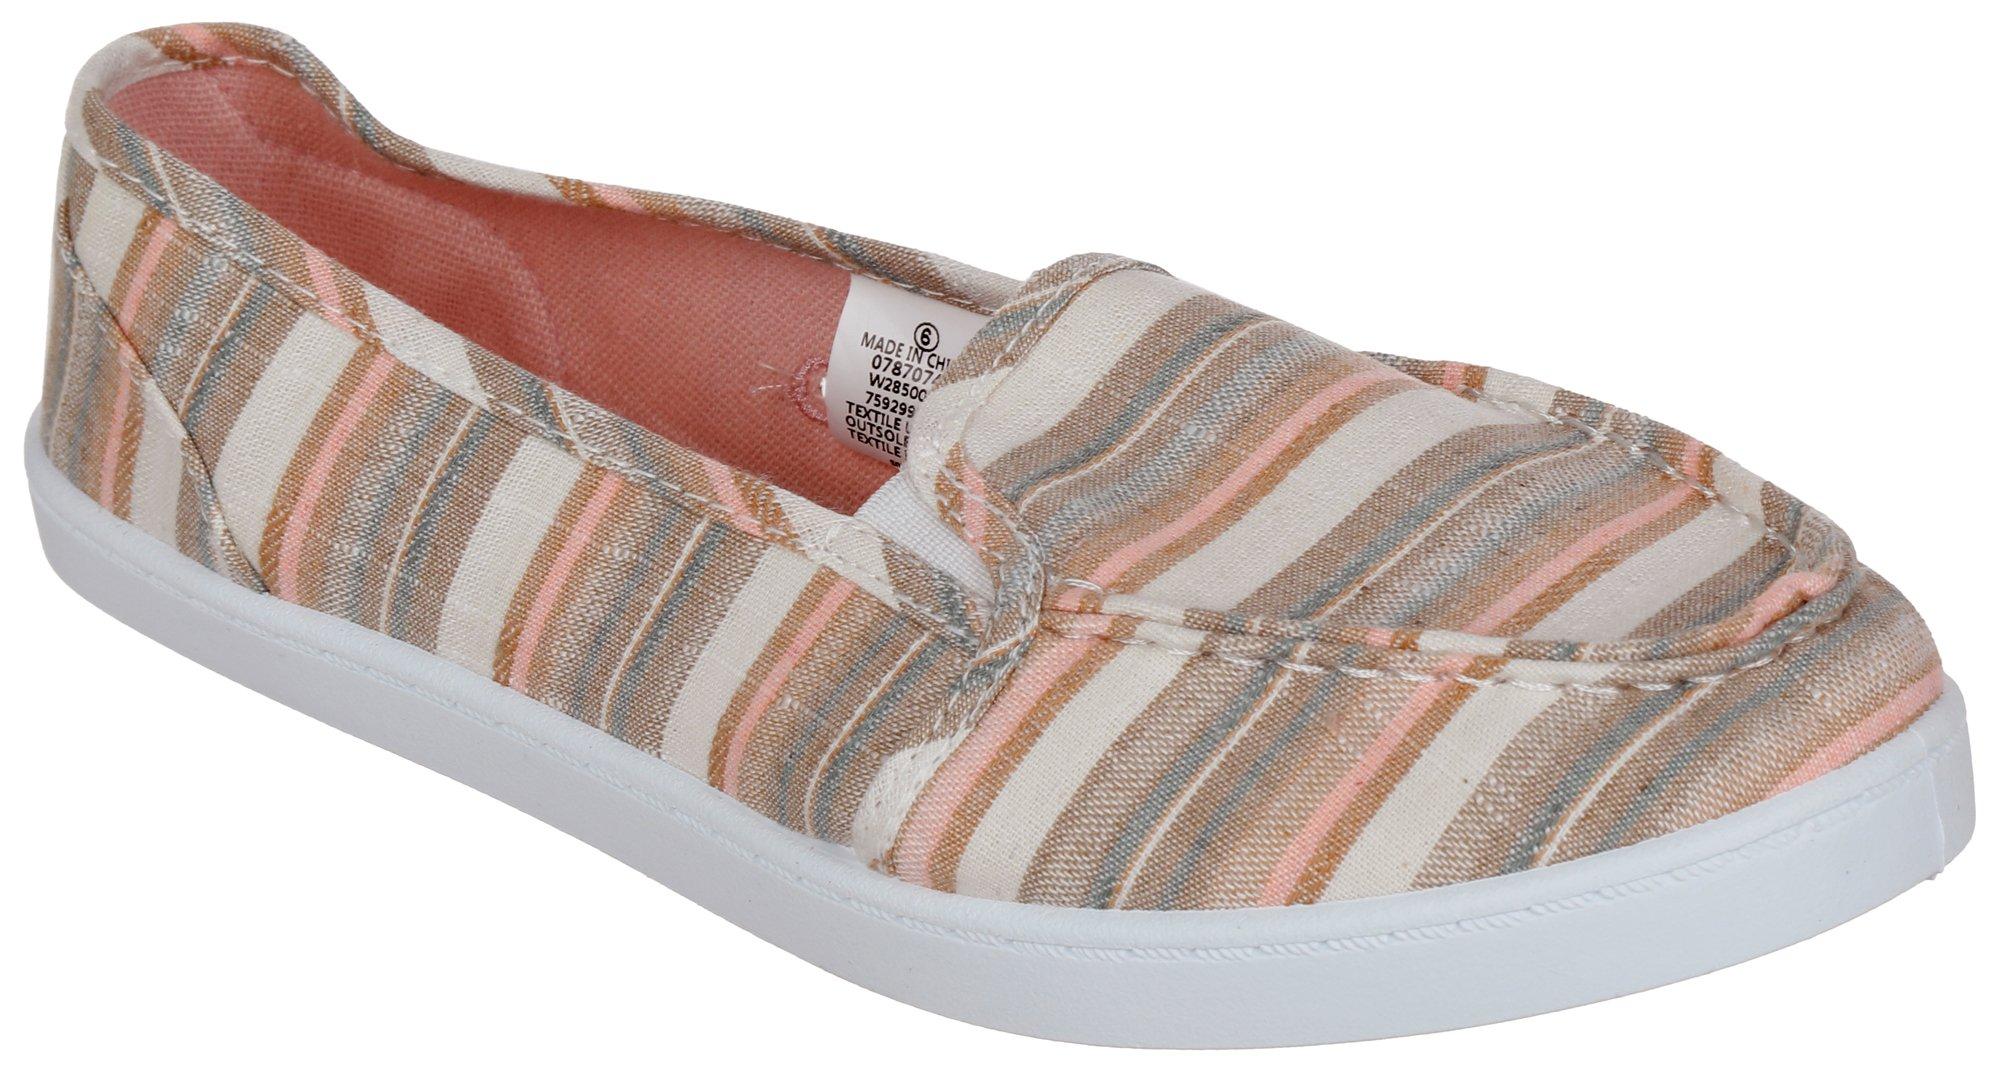 Women's Casual Striped Slip On Shoes